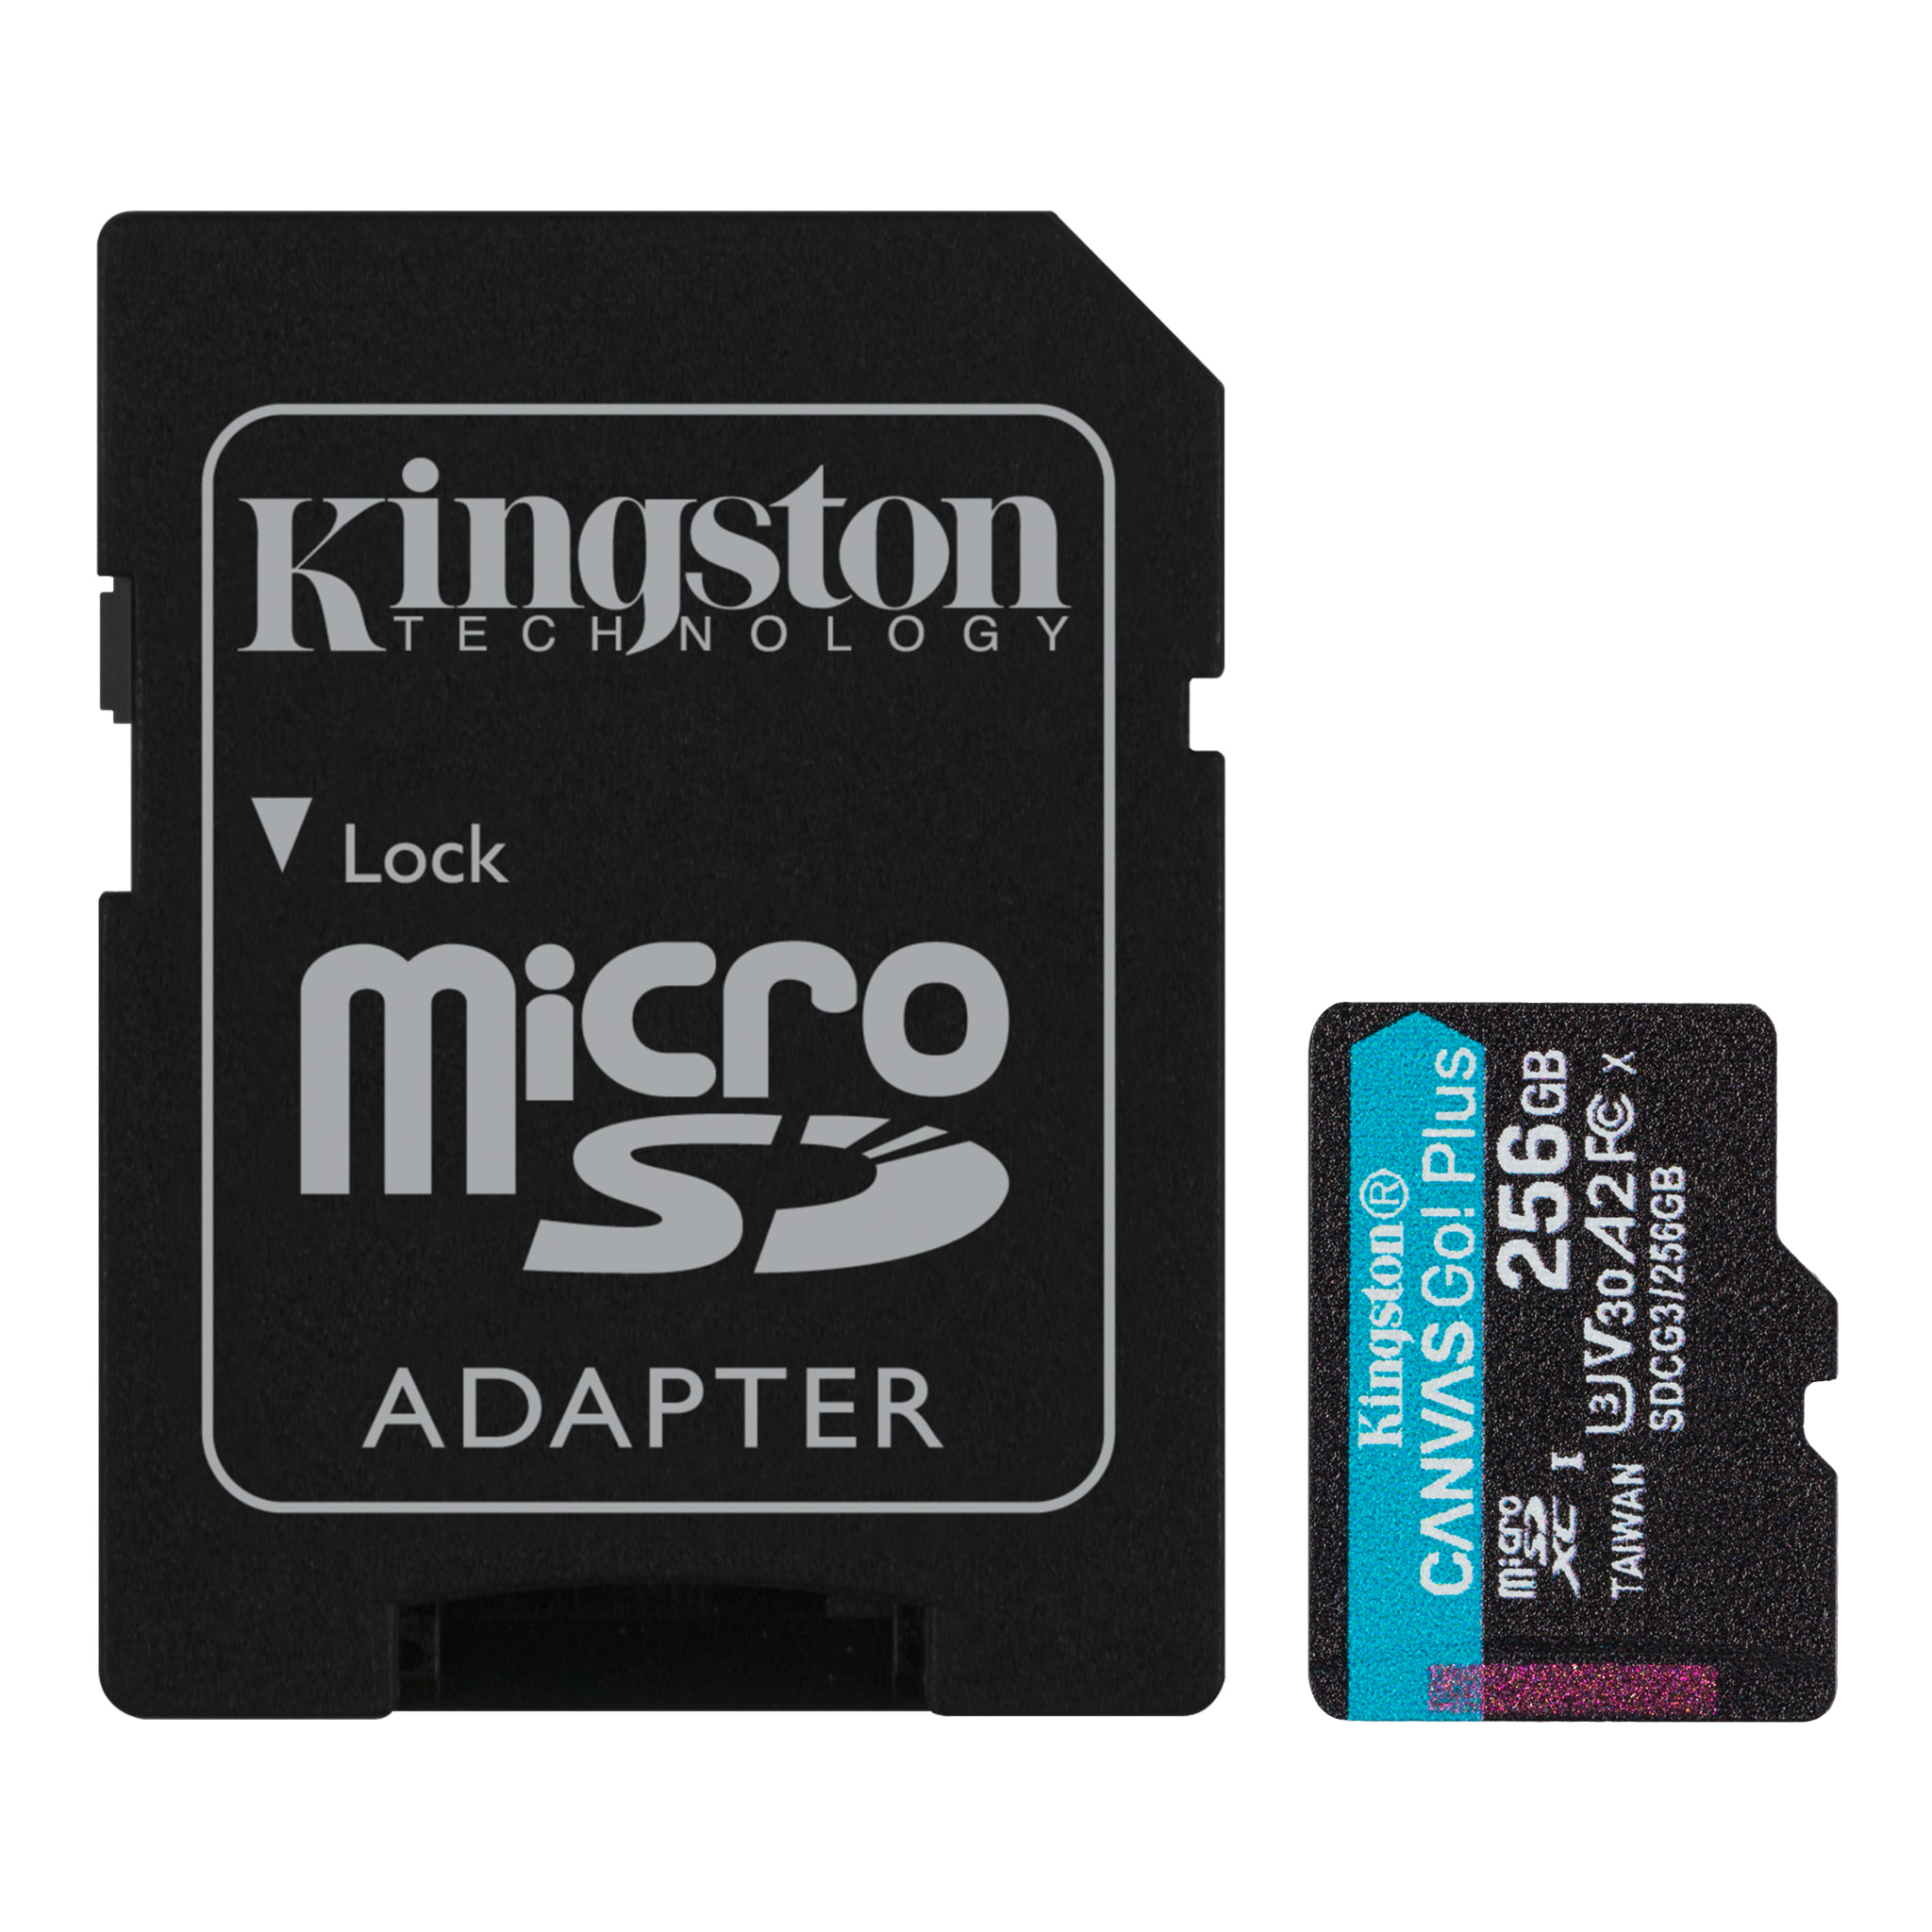 90MBs Works for Kingston Kingston Industrial Grade 8GB Videocon A42 MicroSDHC Card Verified by SanFlash.